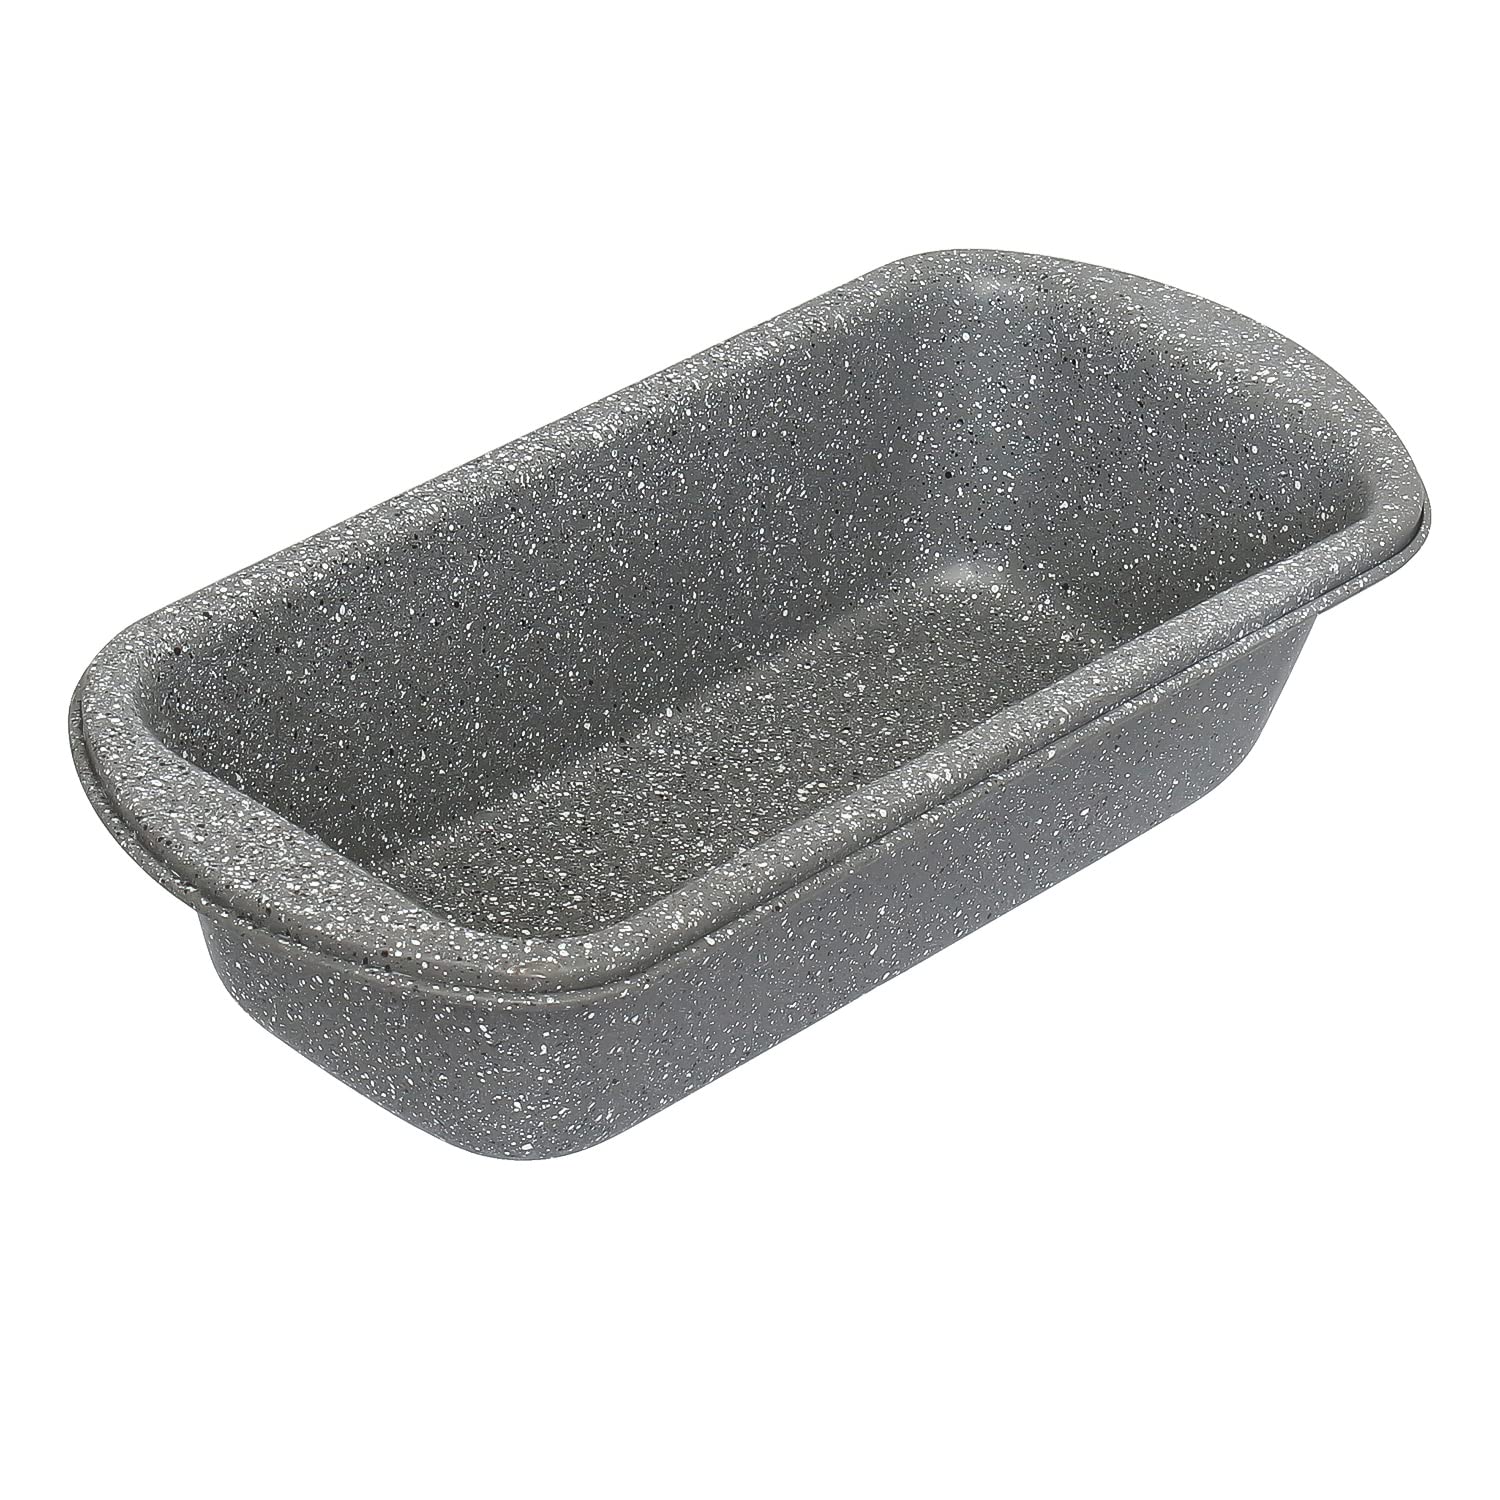 Carbon Steel Loaf Pan, Rentangle Microwave Safe Container, 700 ML, 1 Pcs, Femora